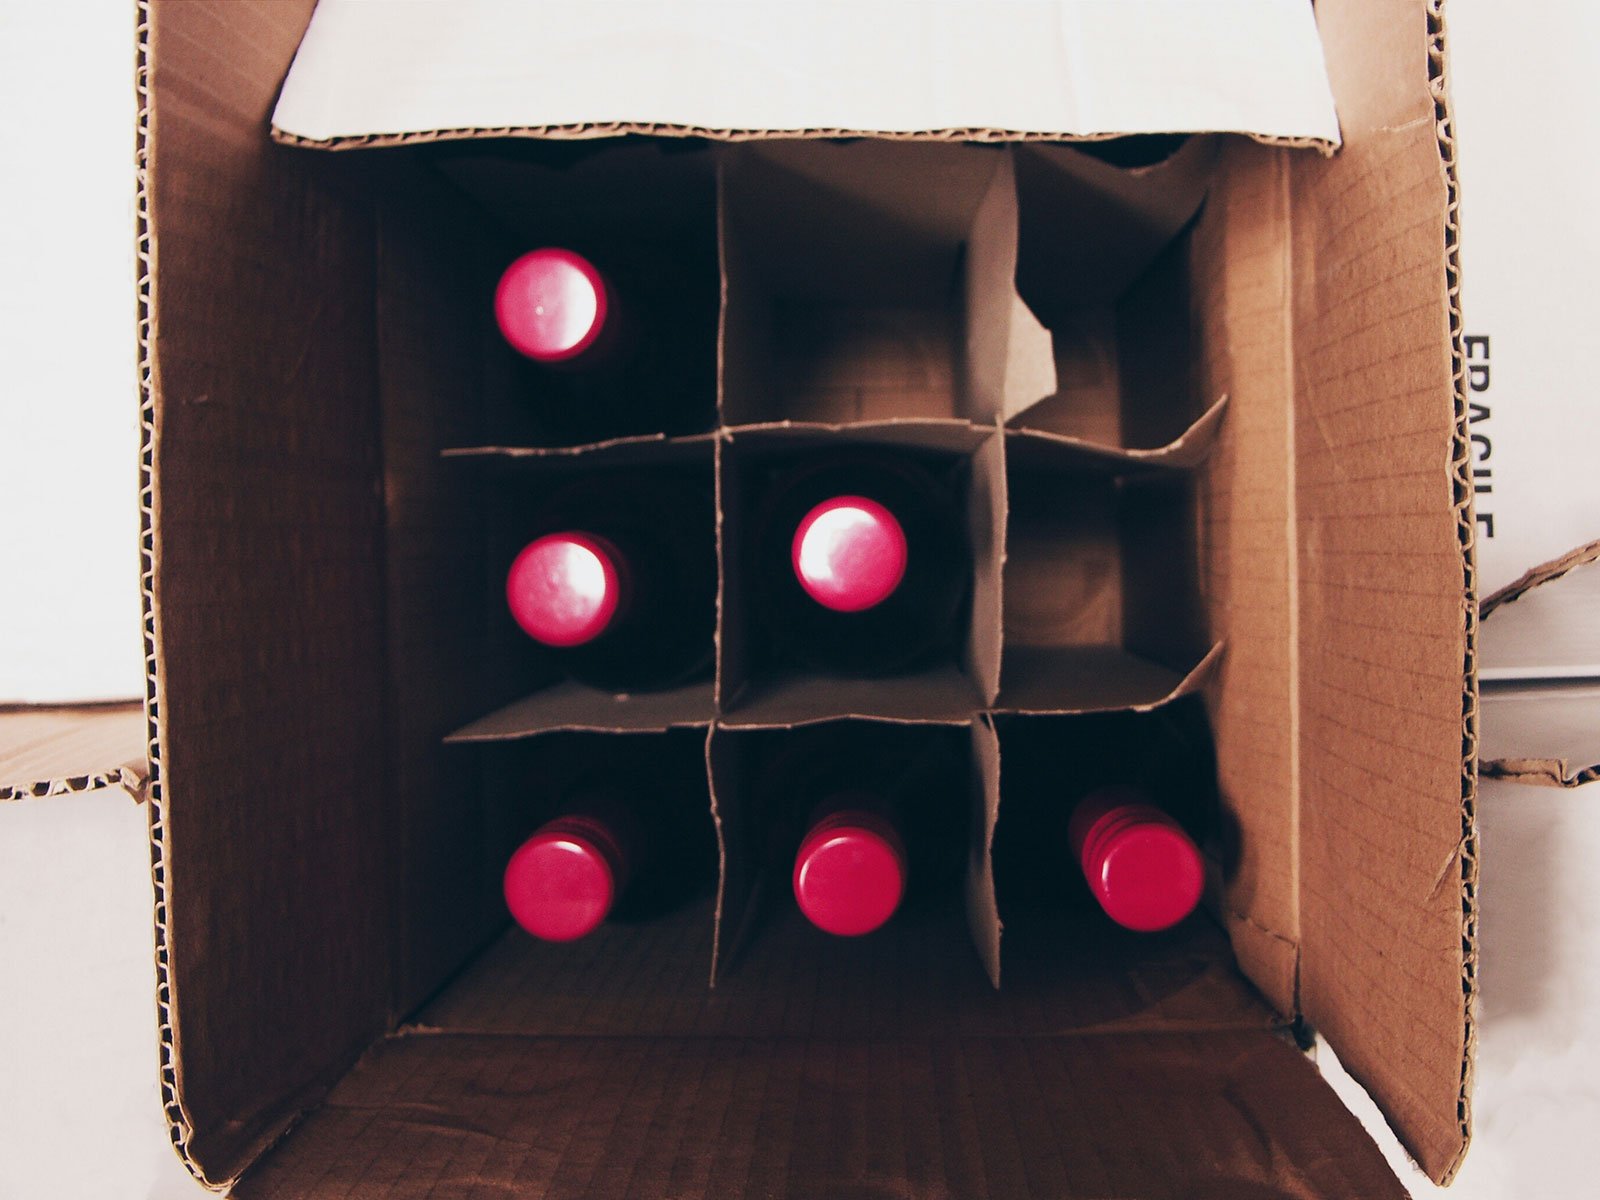 How to Ship Alcohol Through UPS, FedEx and USPS